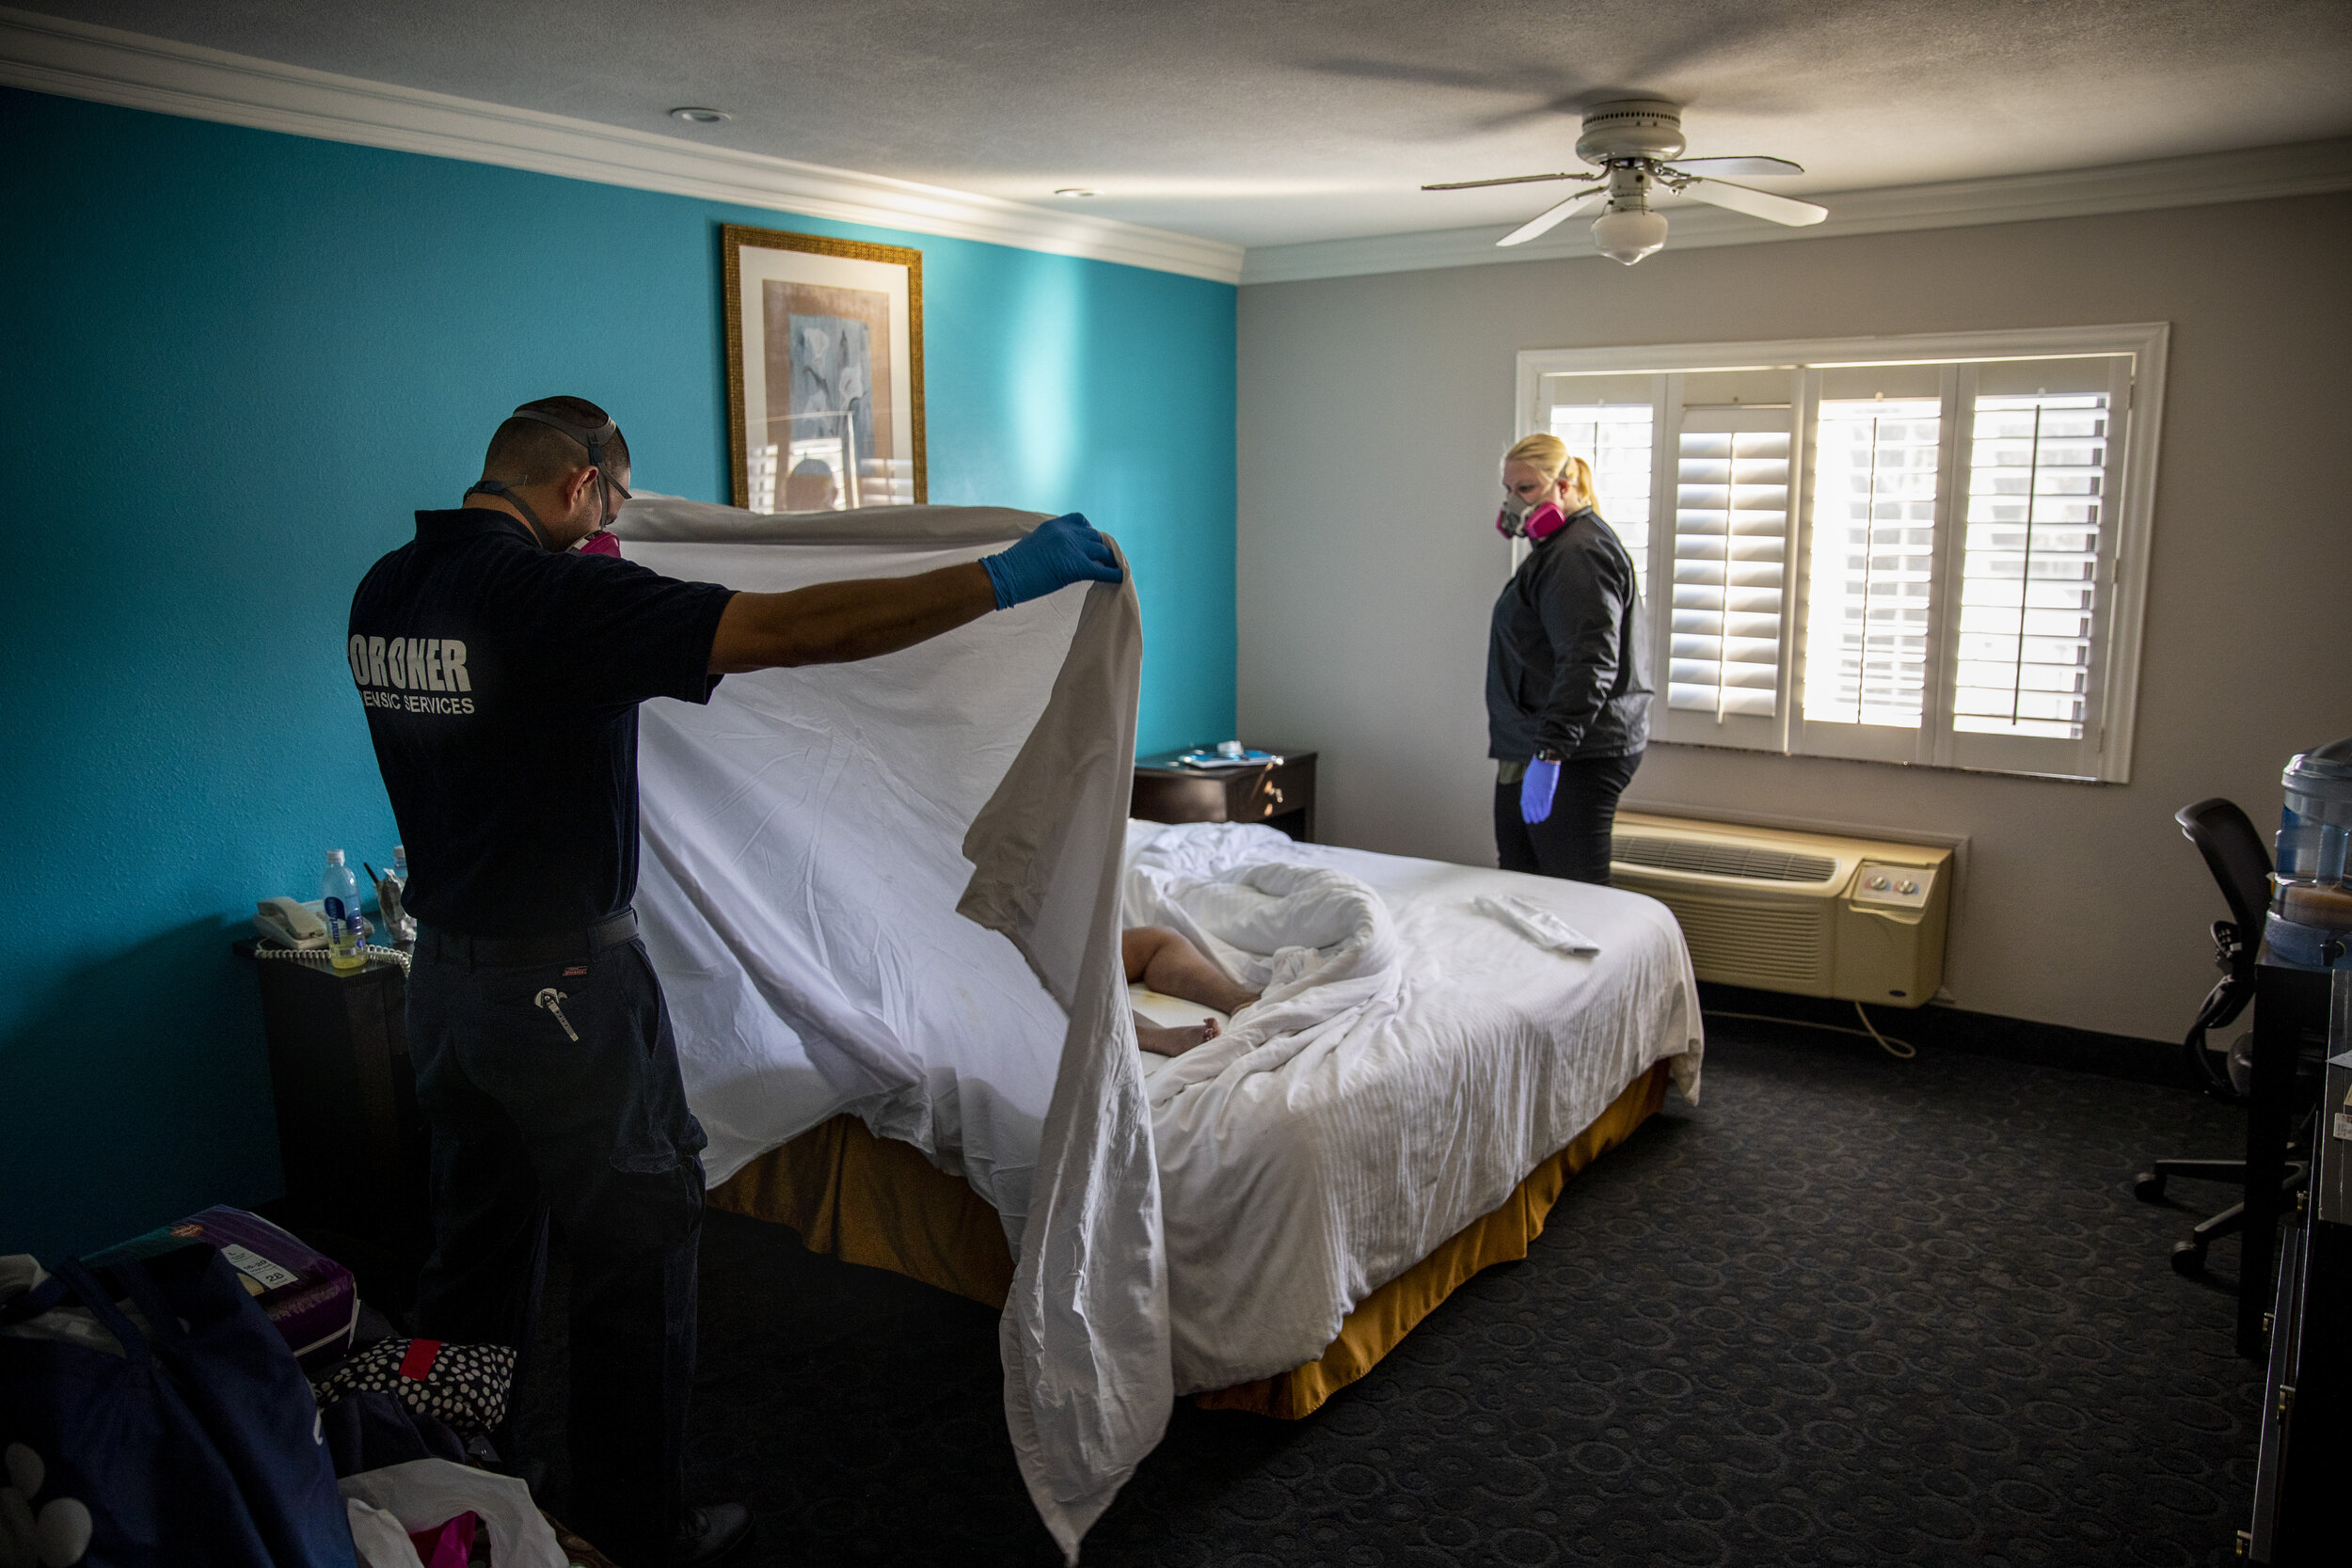  Kristina McGuire, an investigator with the Los Angeles County Dept. of Medical Examiner-Coroner, right and Jerry Meza, forensic attendant, prepare to wrap and transport the lifeless body of Judy Bounthong, 58, an ob-gyn tech at Emanate Queen of the 